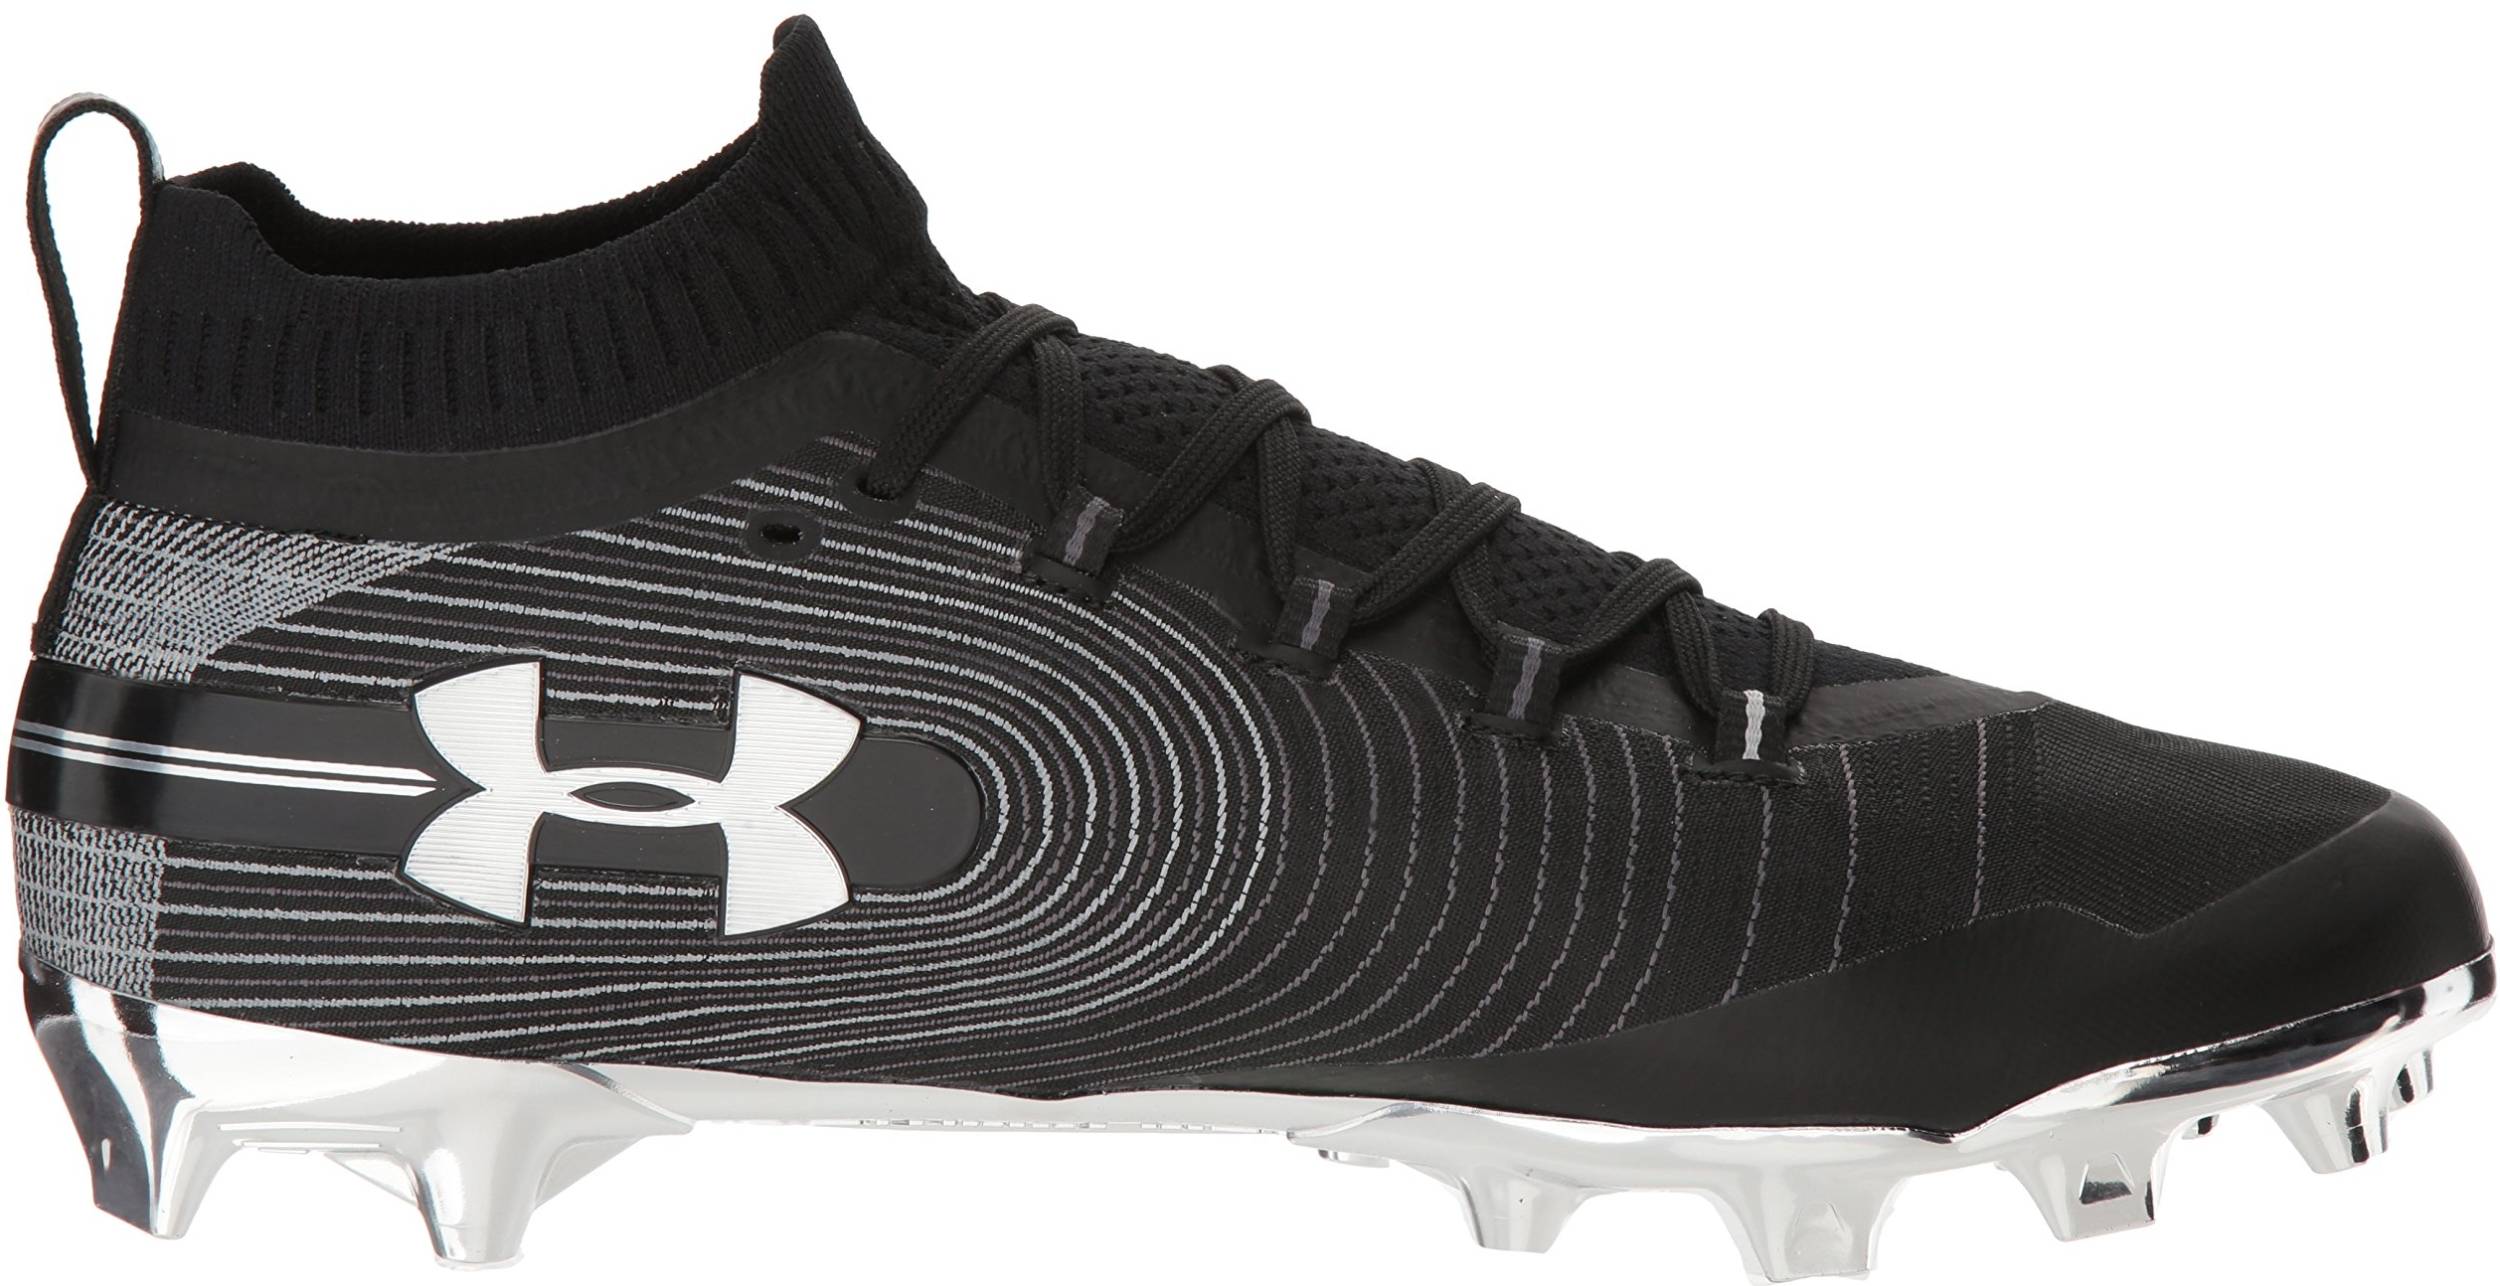 Details about   Under Armour Men’s Sports UA Spotlight MC Football Cleats Shoes GOAL IS HERE!!